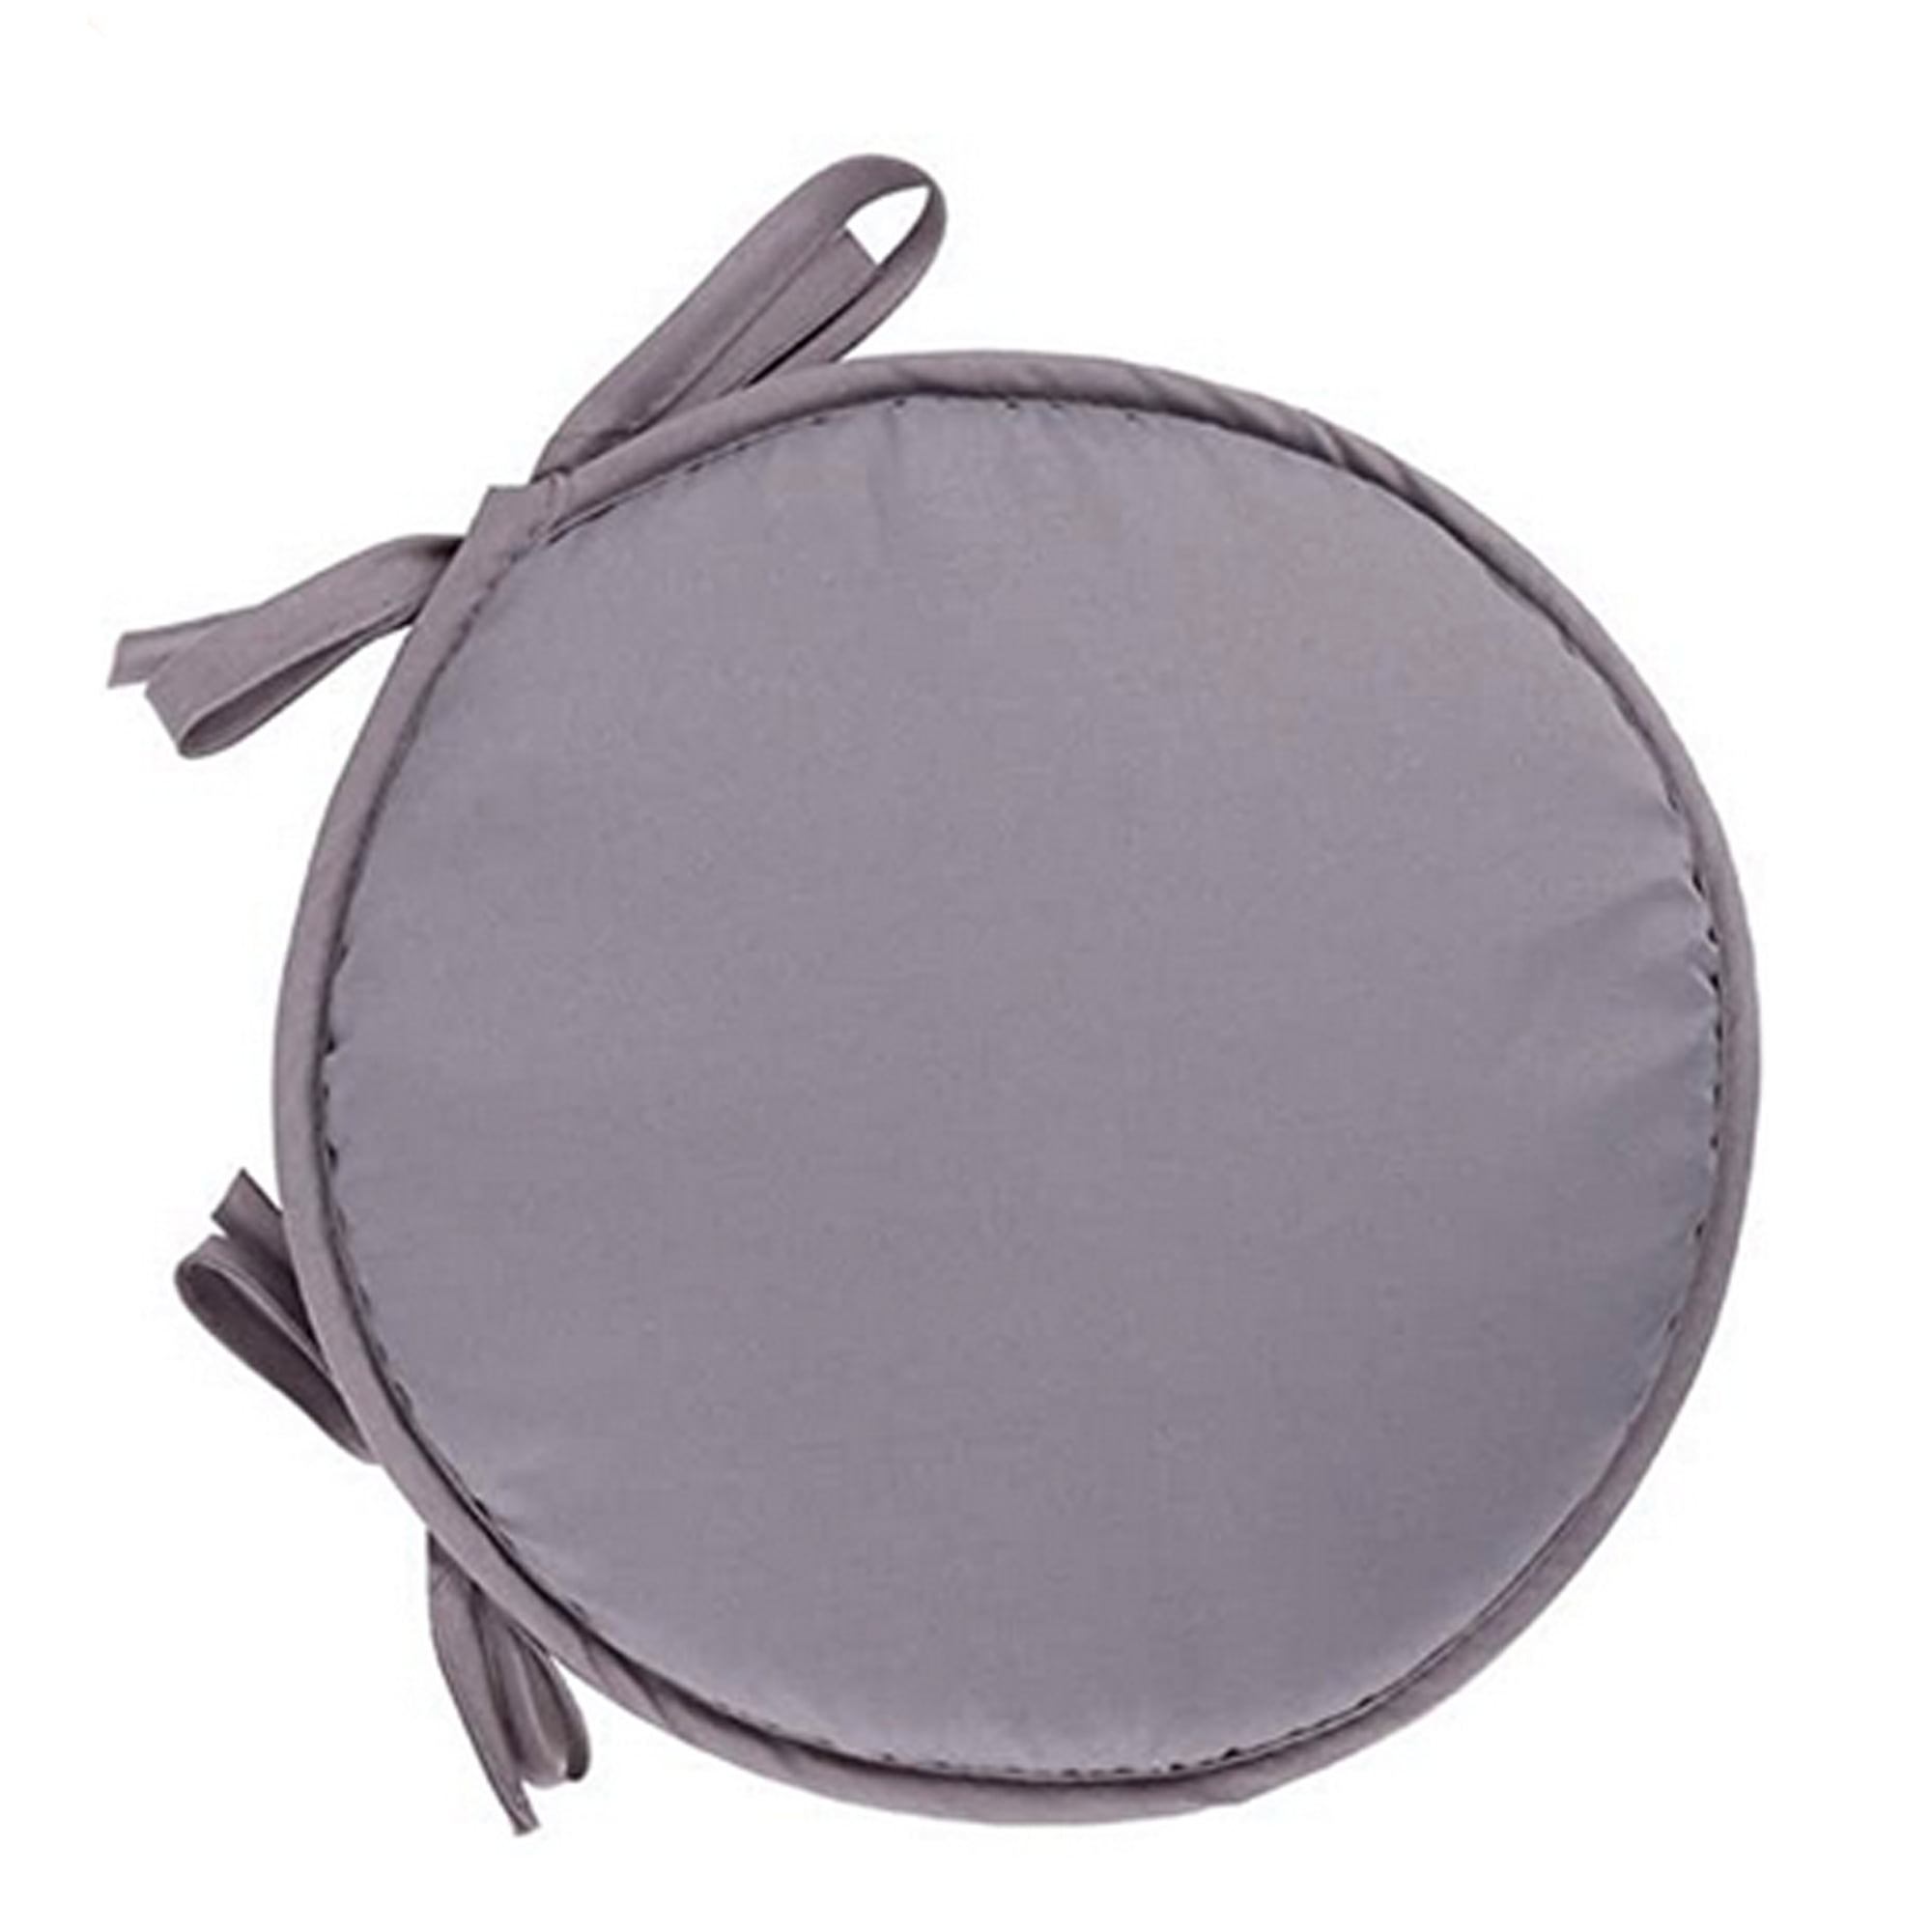 Round Bistro Circular Chair Cushion Seat Pads Kitchen Dining Removable Cover S 